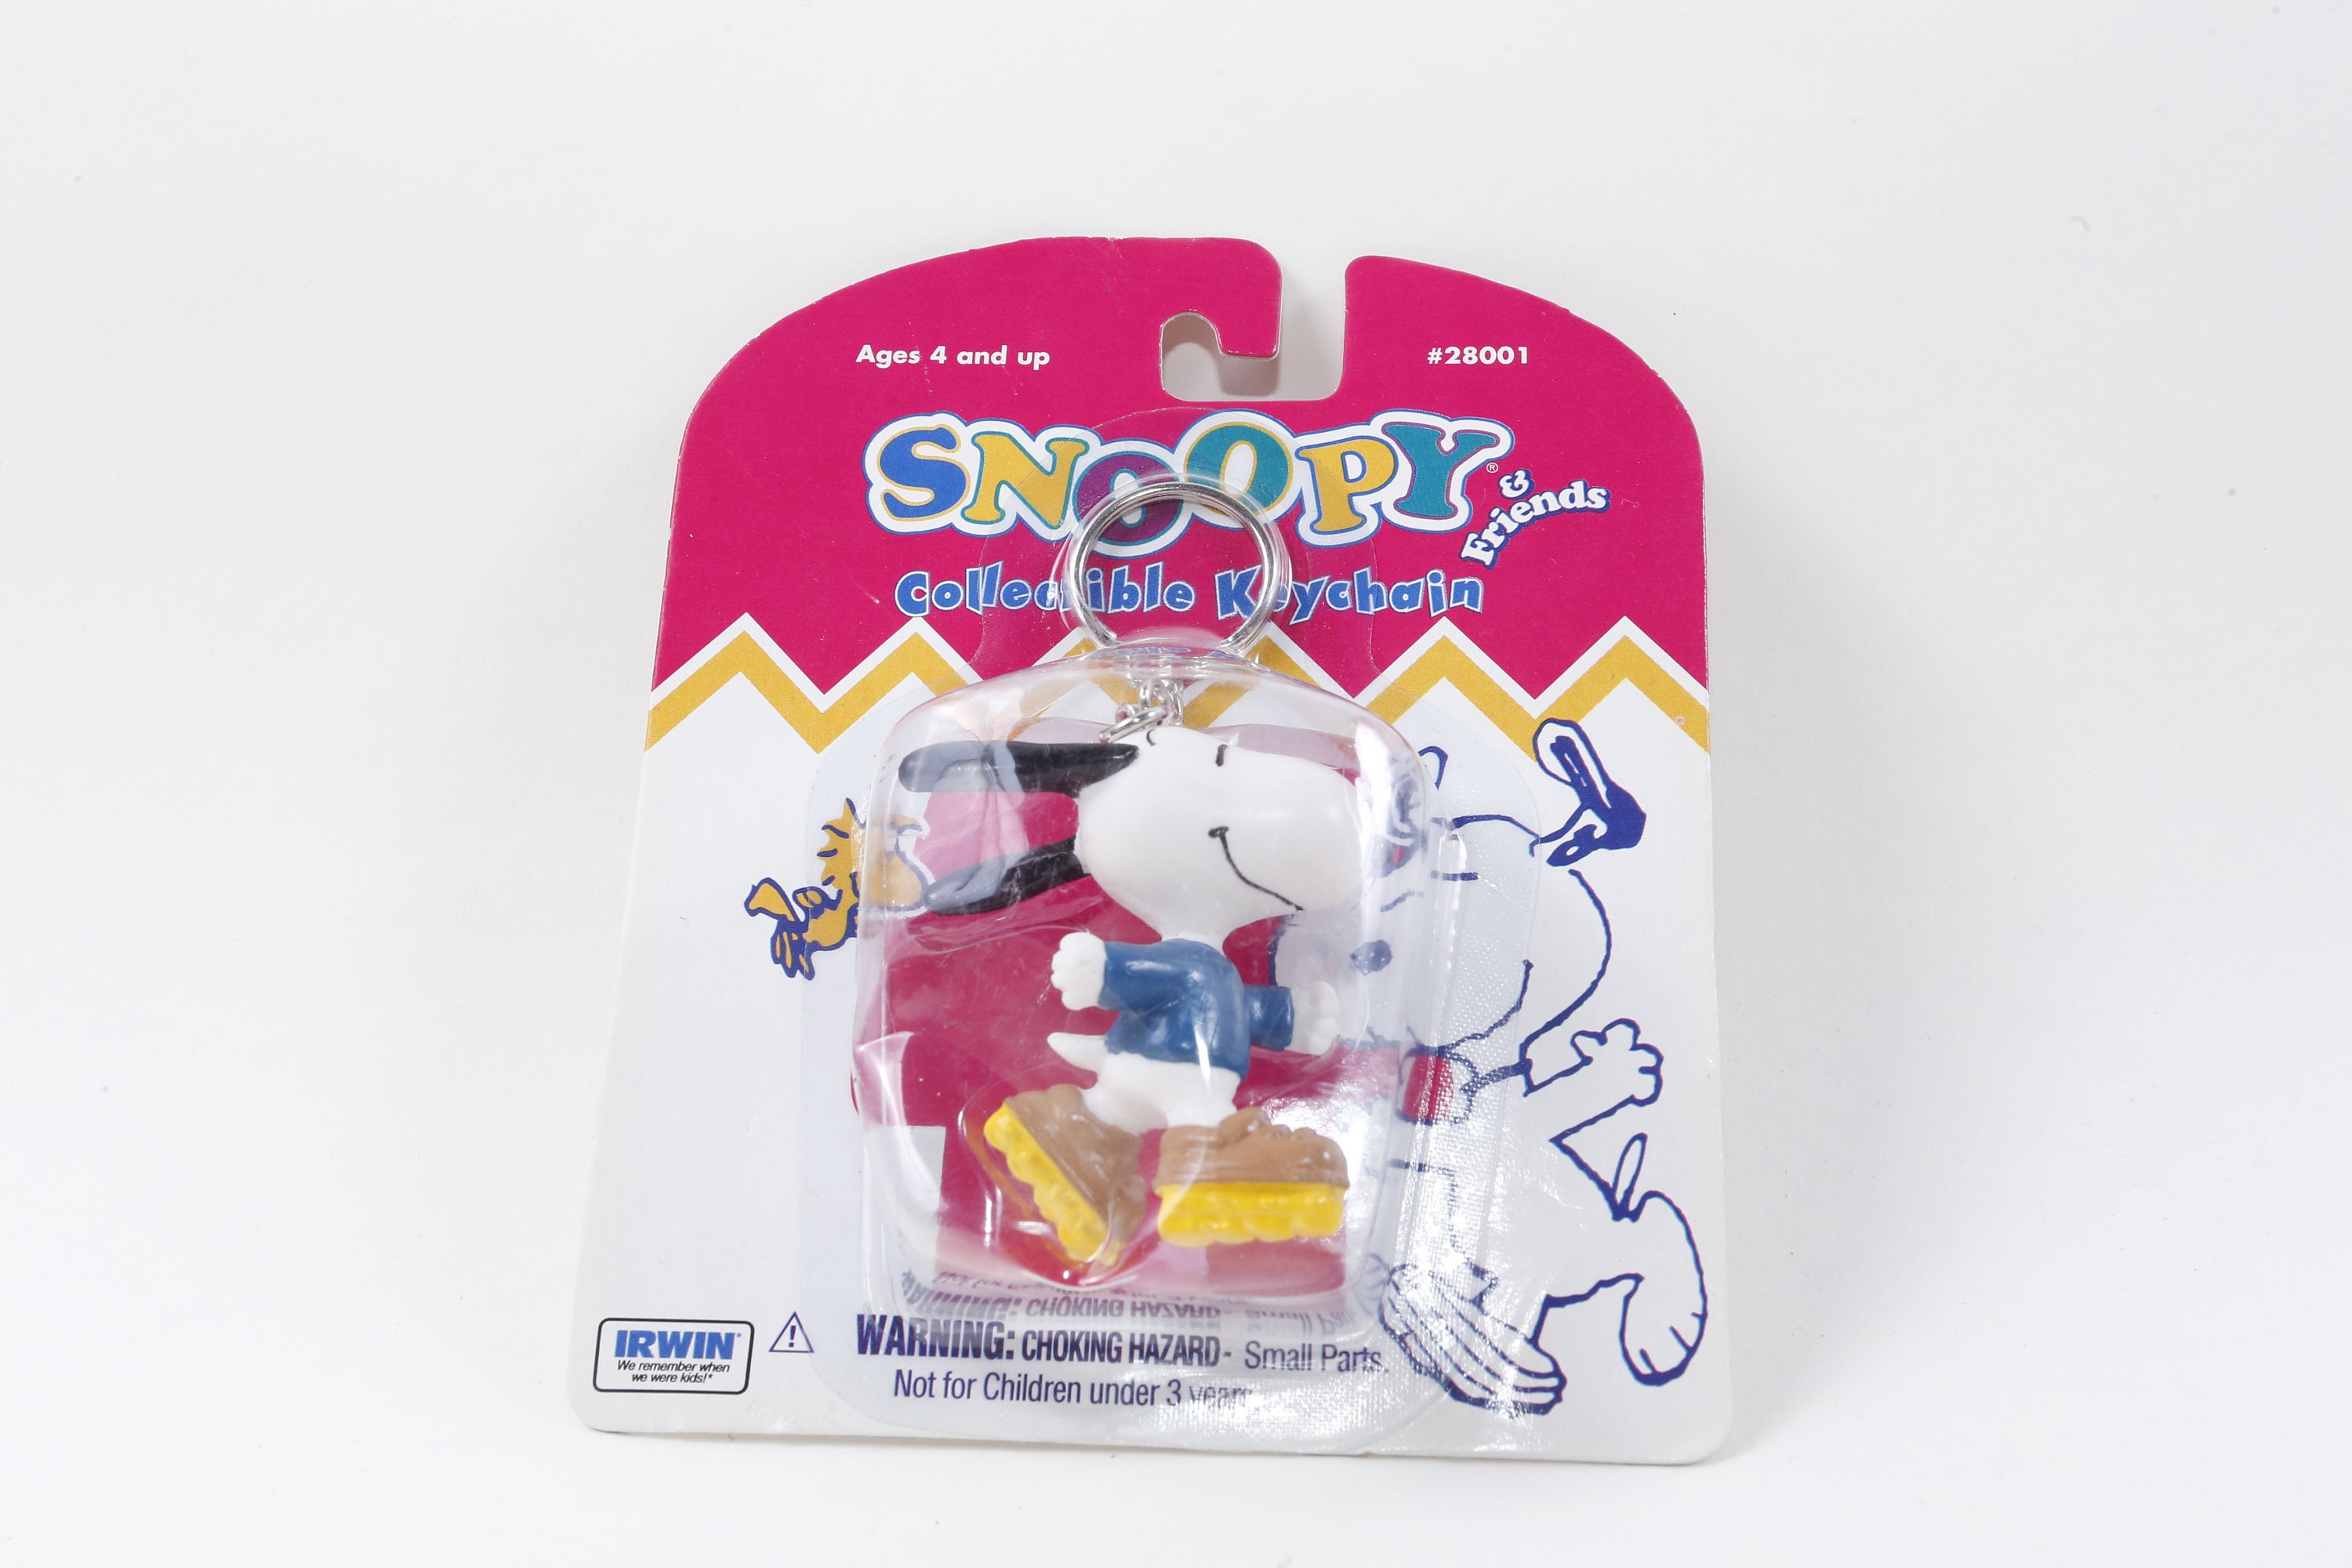 Rollers Snoopy - Rouge - Rollers Fille